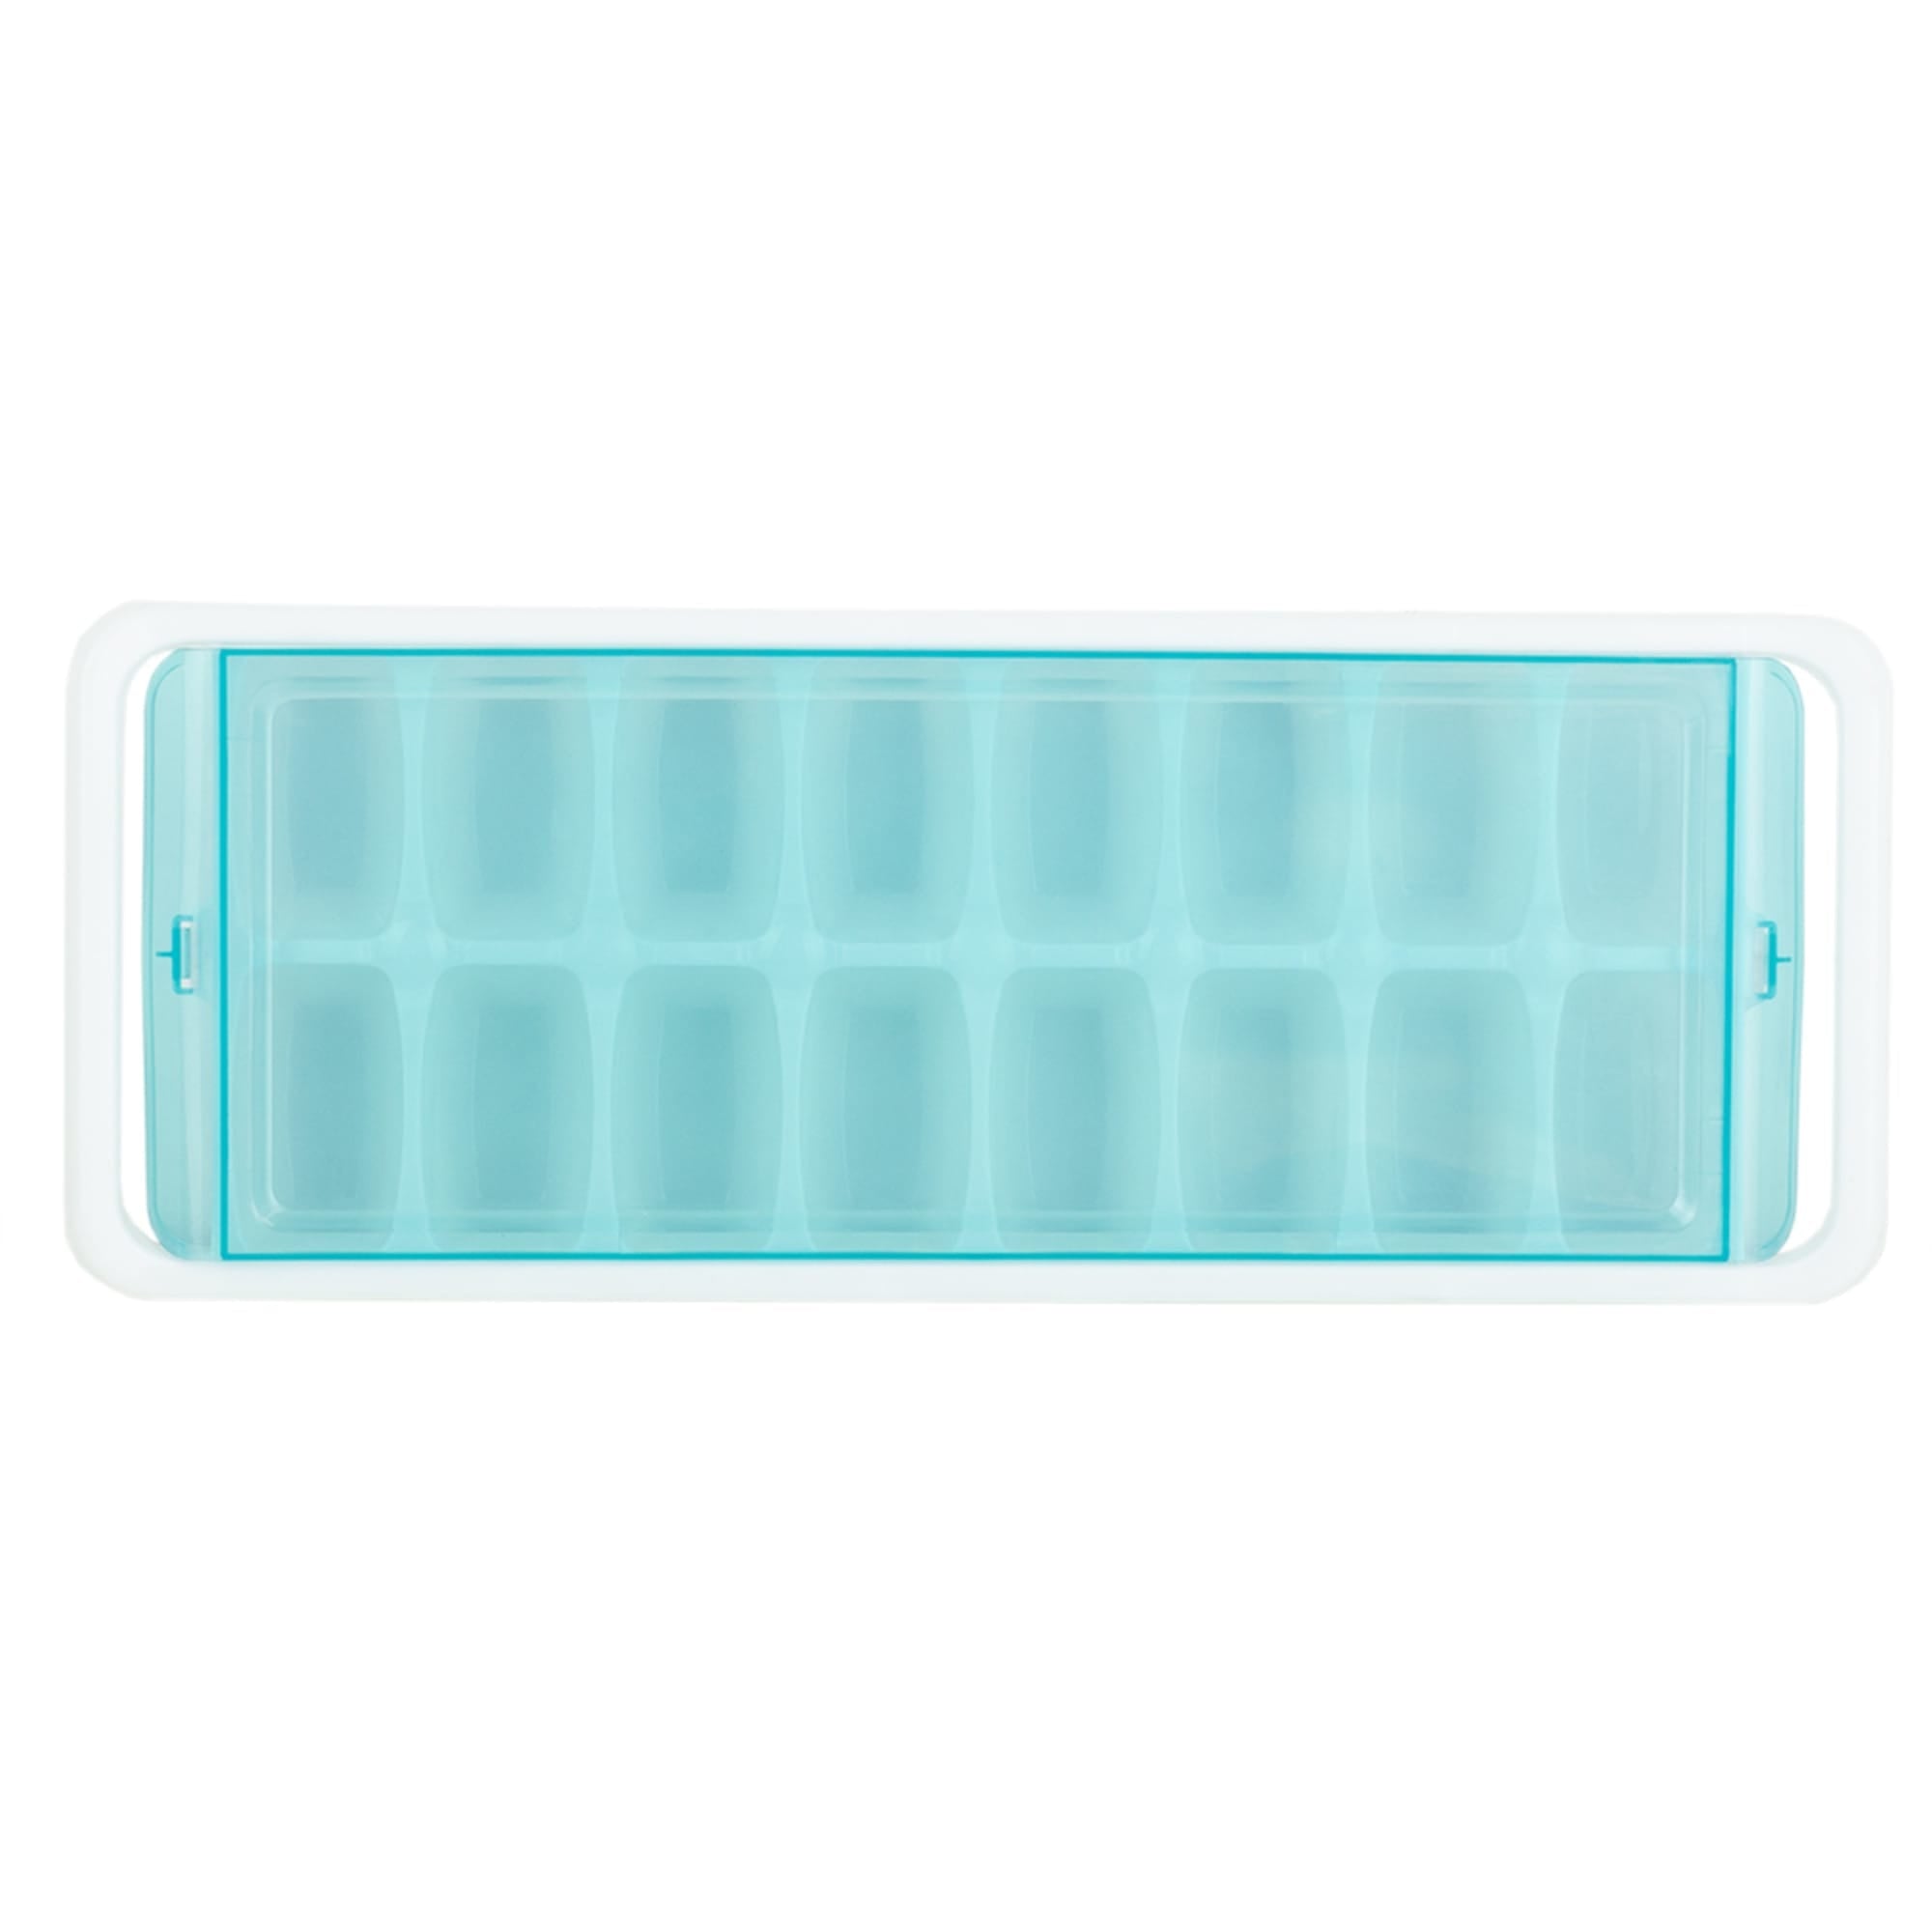 Home Basics 16 Compartment Square Plastic Stackable Ice Cube Tray with Snap-on Cover, Blue $2.00 EACH, CASE PACK OF 12